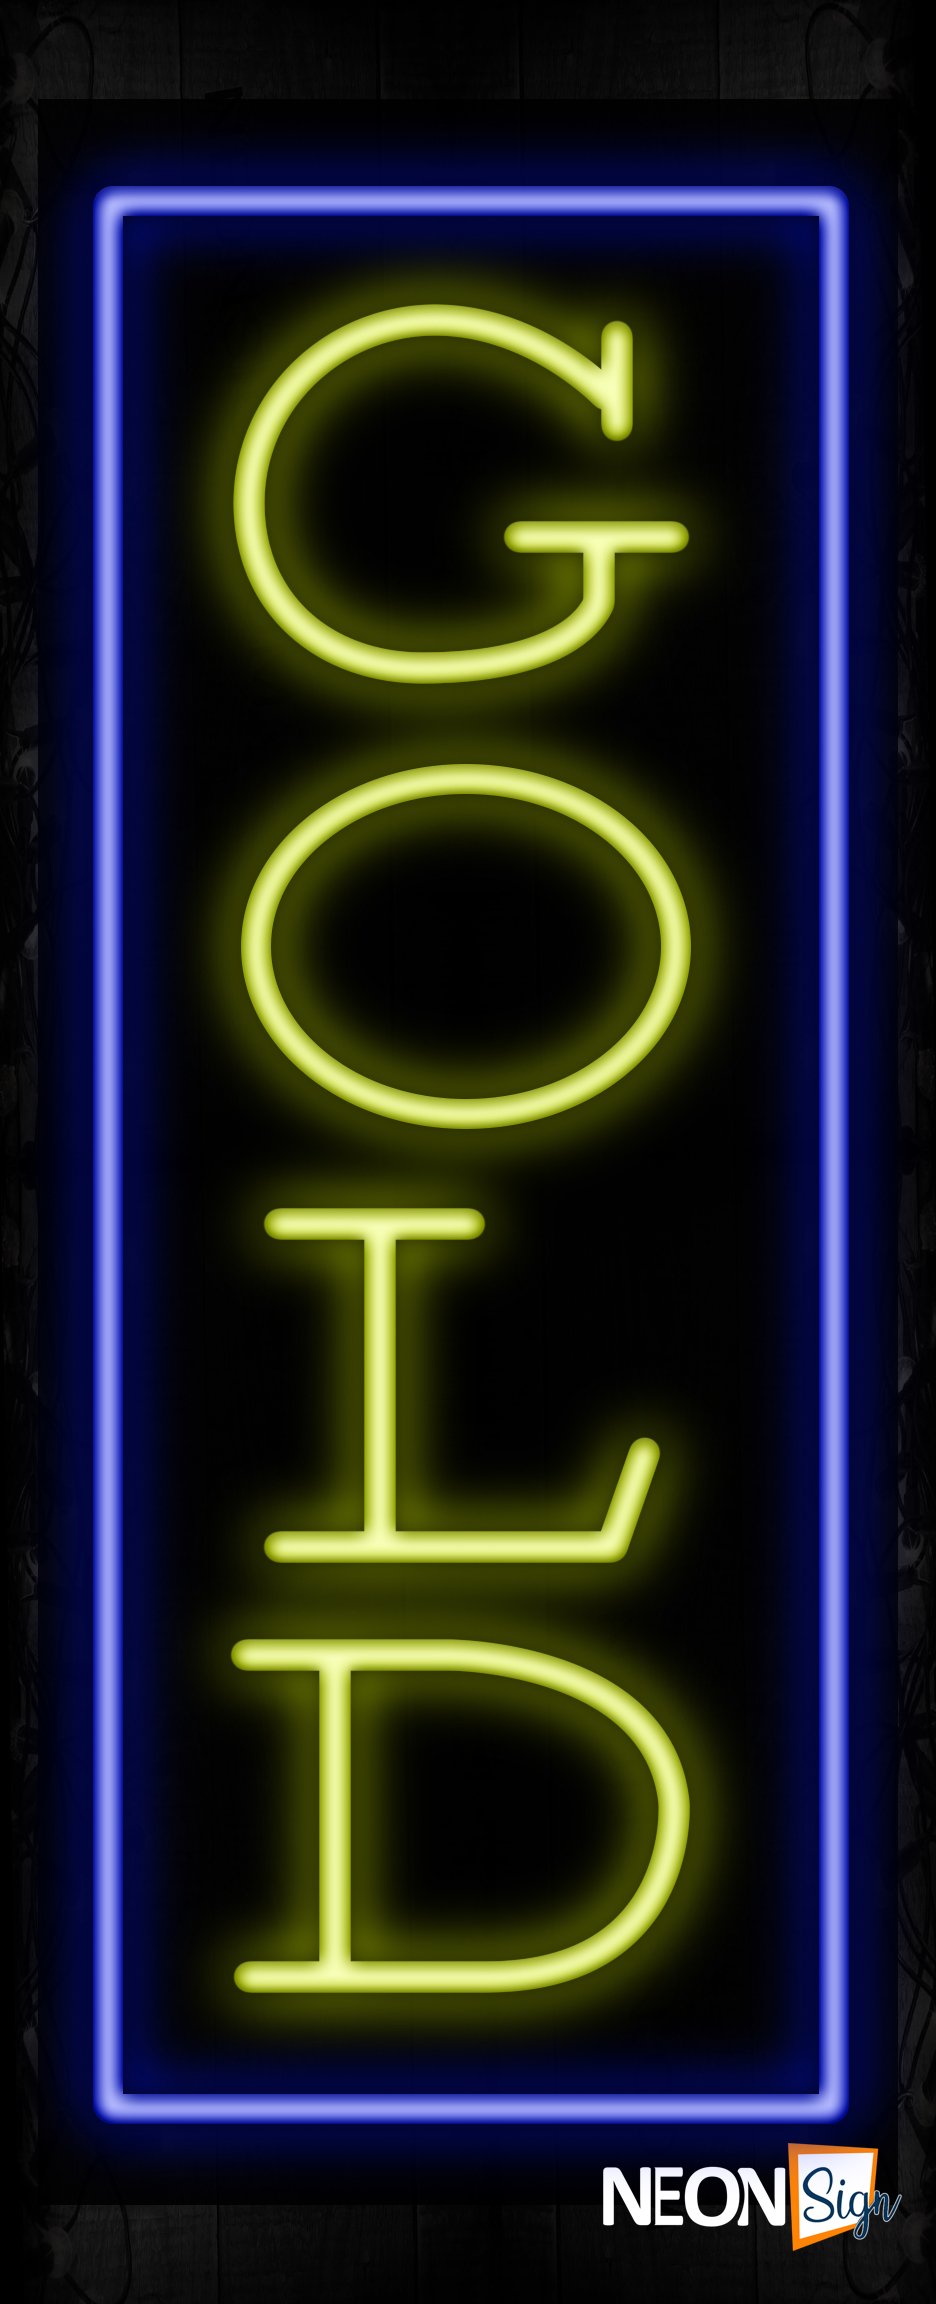 Image of 11233 Gold with border Neon Signs_32 x12 Black Backing